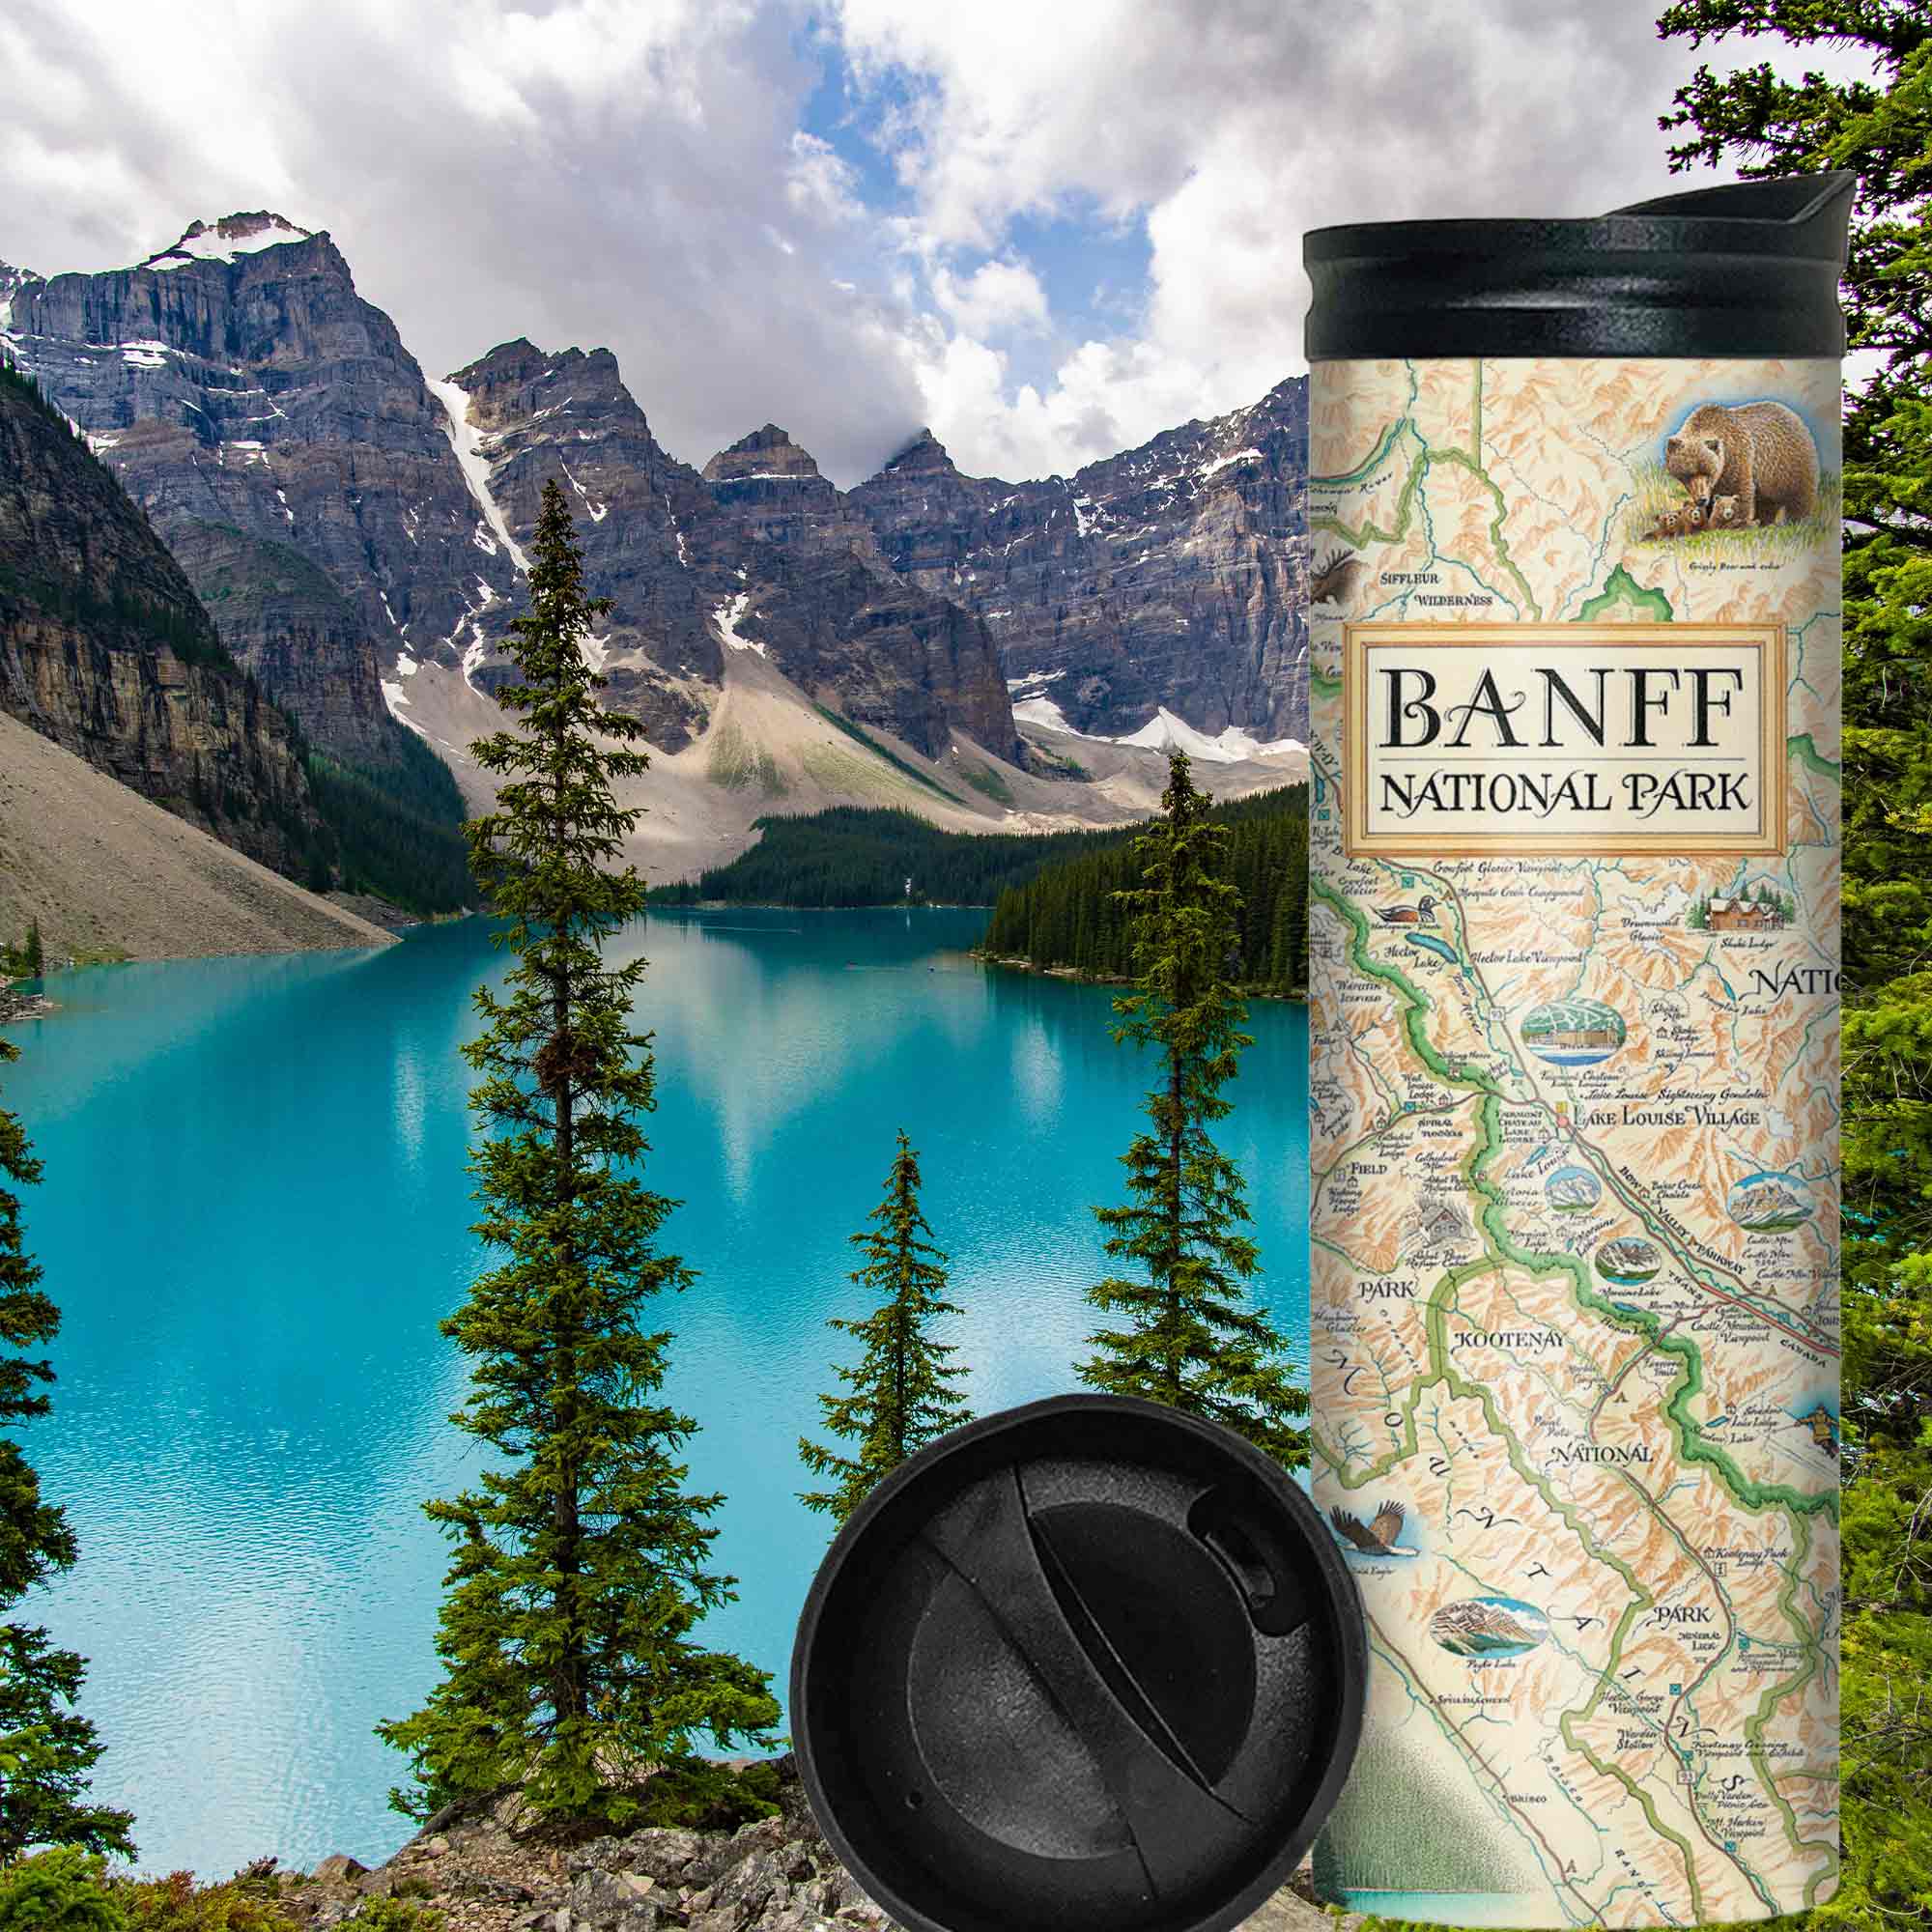 Banff National Park Map Travel Drinkware - 16 oz sitting in a forest overlooking a glacier lake with mountains and snow. Featured on the map are grizzly bears, elk, mountain lions, and wolves. The map also features Jasper National Park, Yoho National Park, and Kootenay National Park. The featured illustration of the map is Lake Louise.